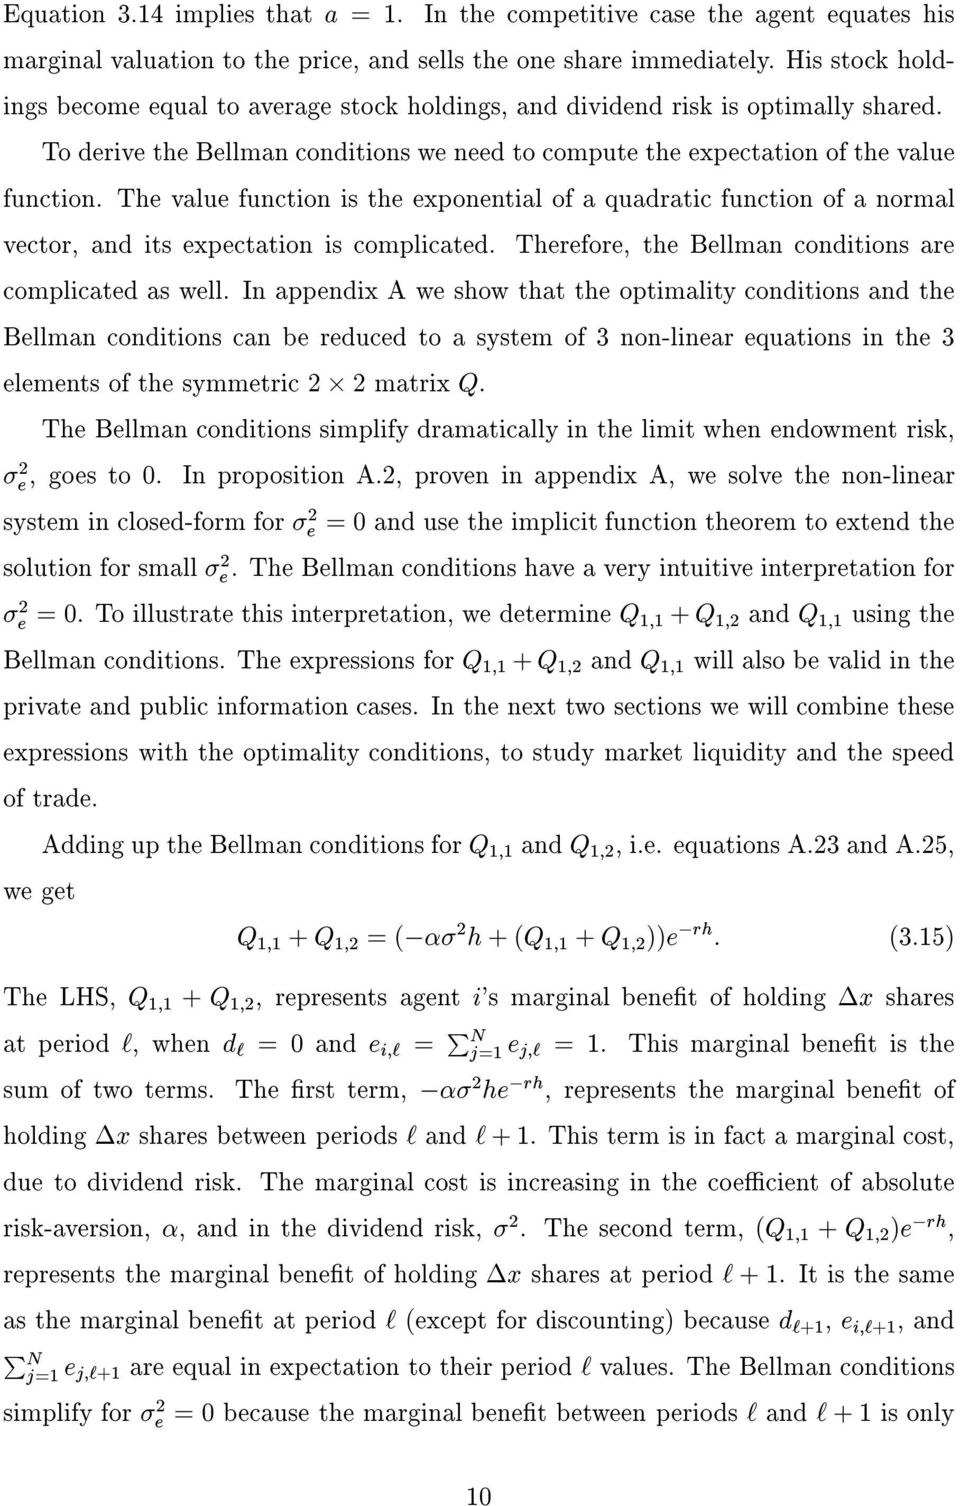 Te value function is te exponential of a quadratic function of a normal vector, and its expectation is complicated. Terefore, te Bellman conditions are complicated as well.